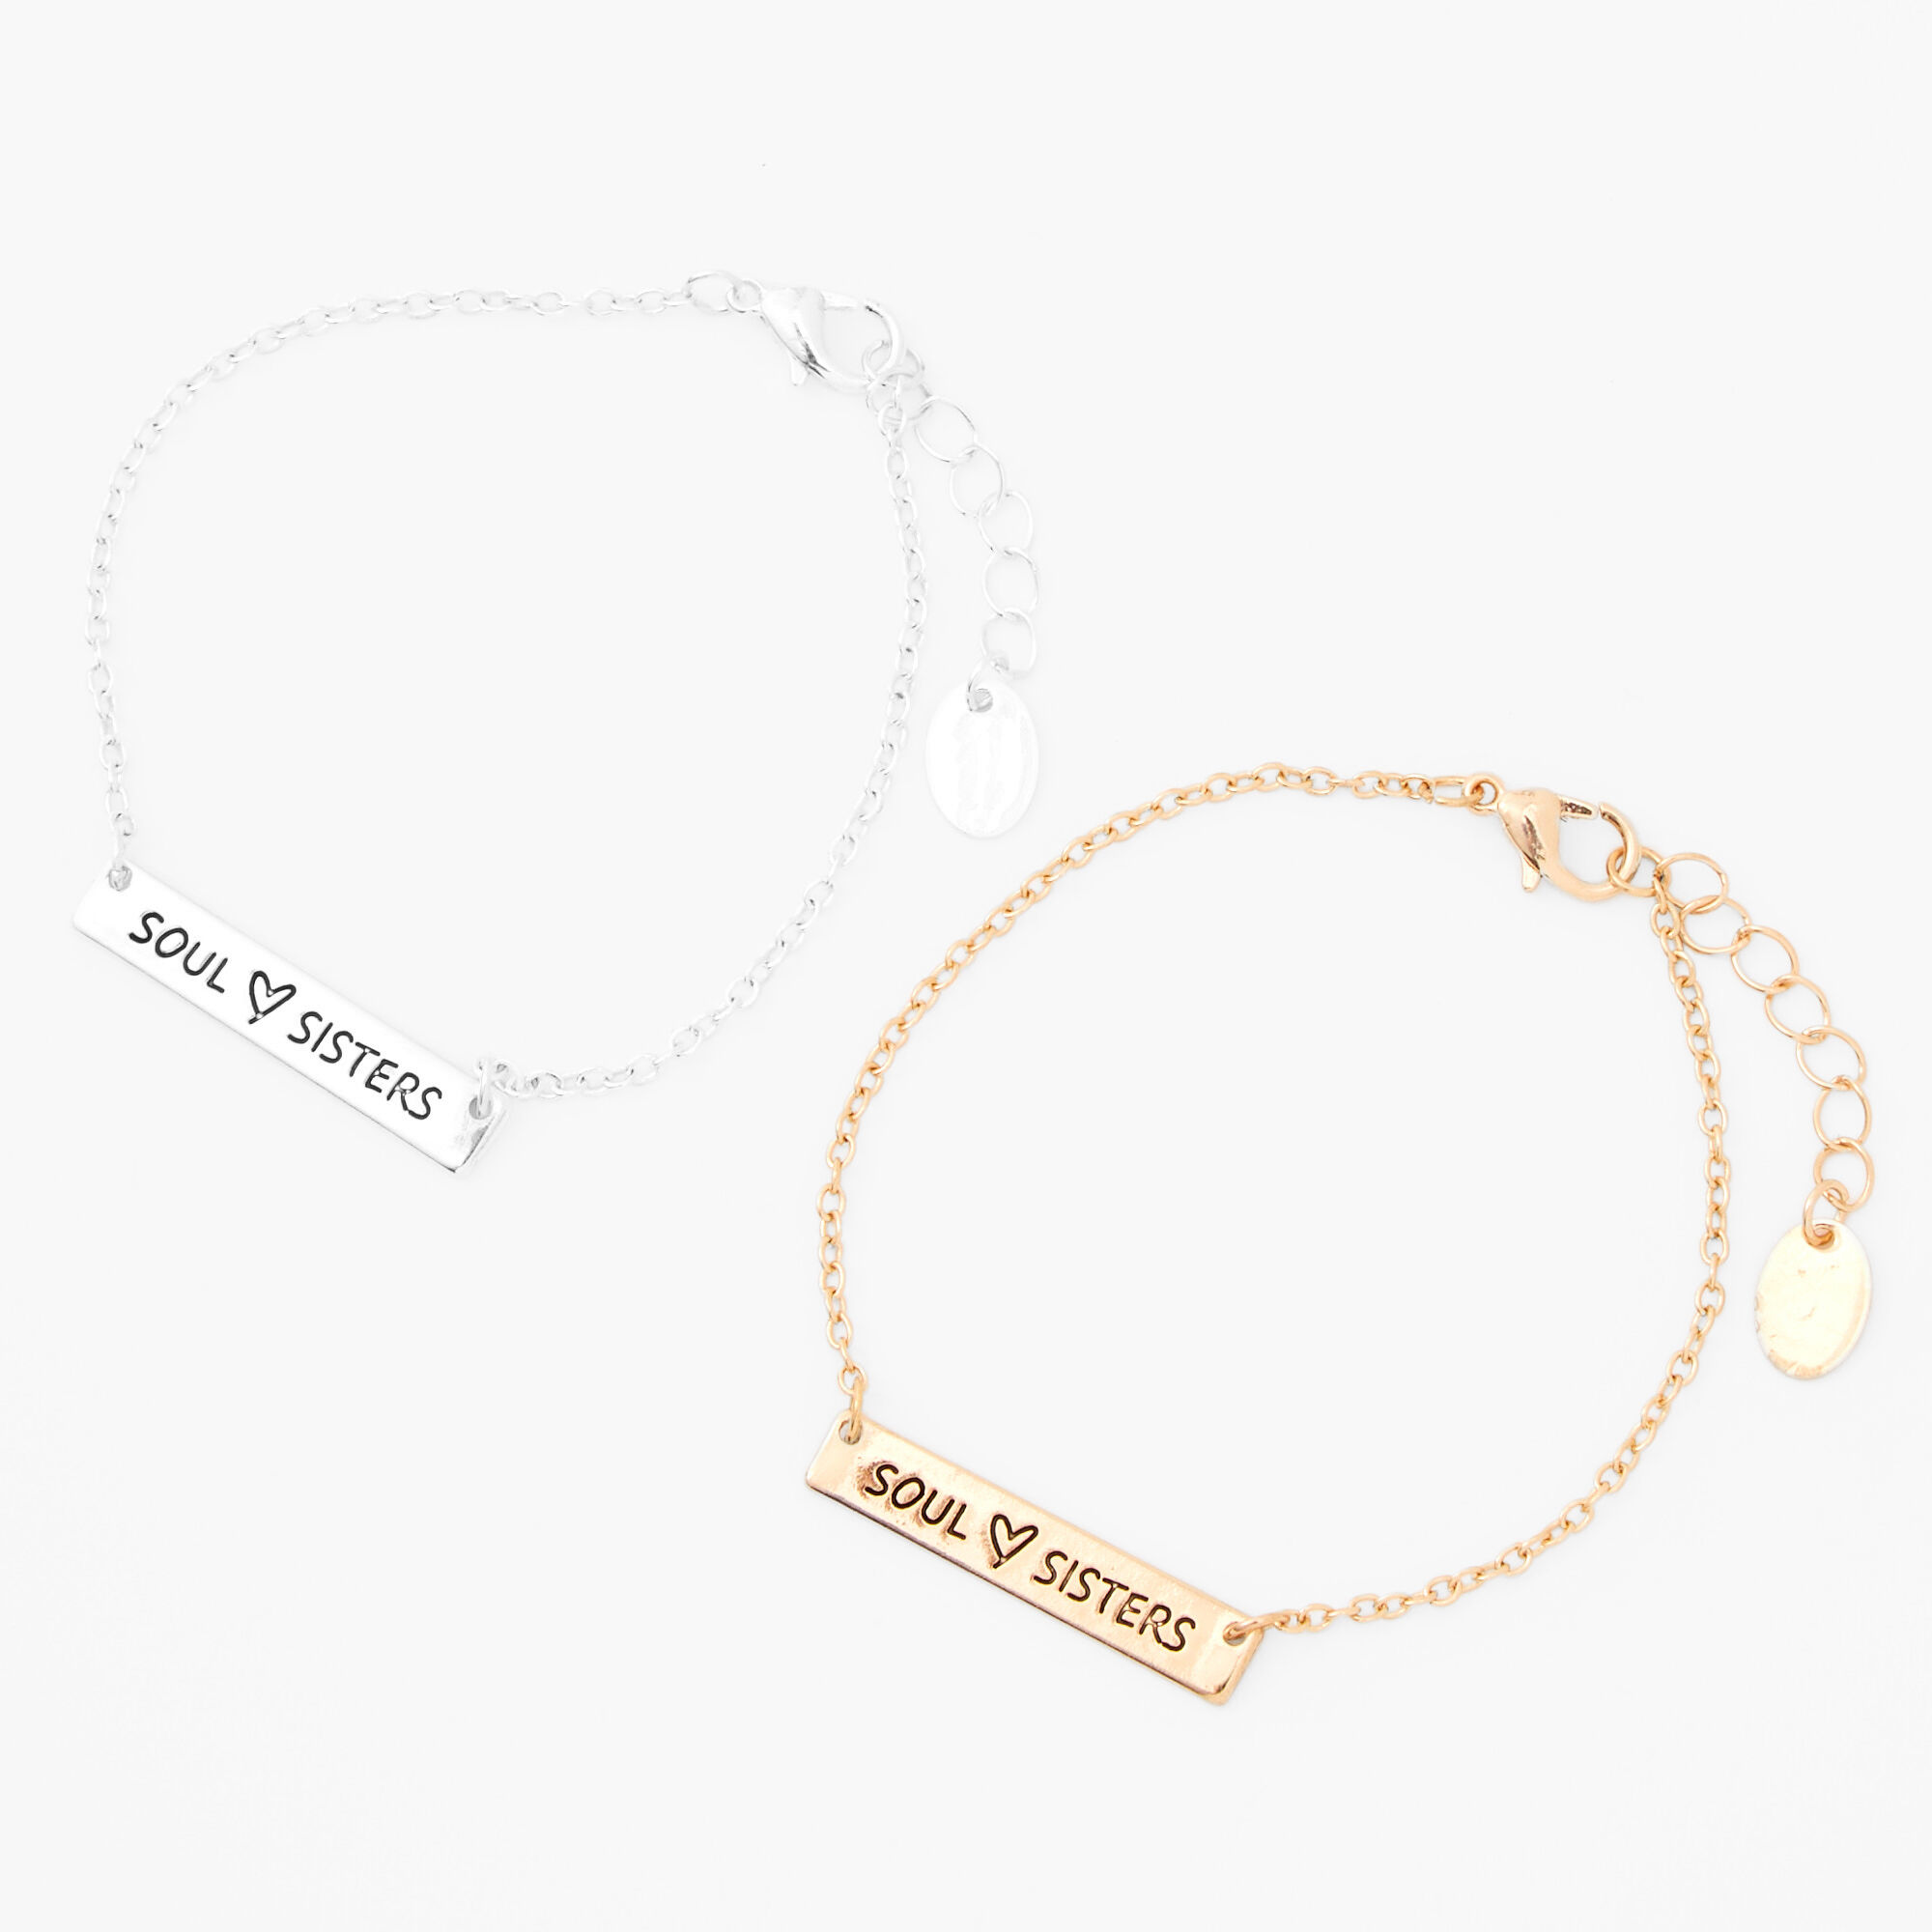 View Claires Soul Sisters Bracelets 2 Pack Gold information